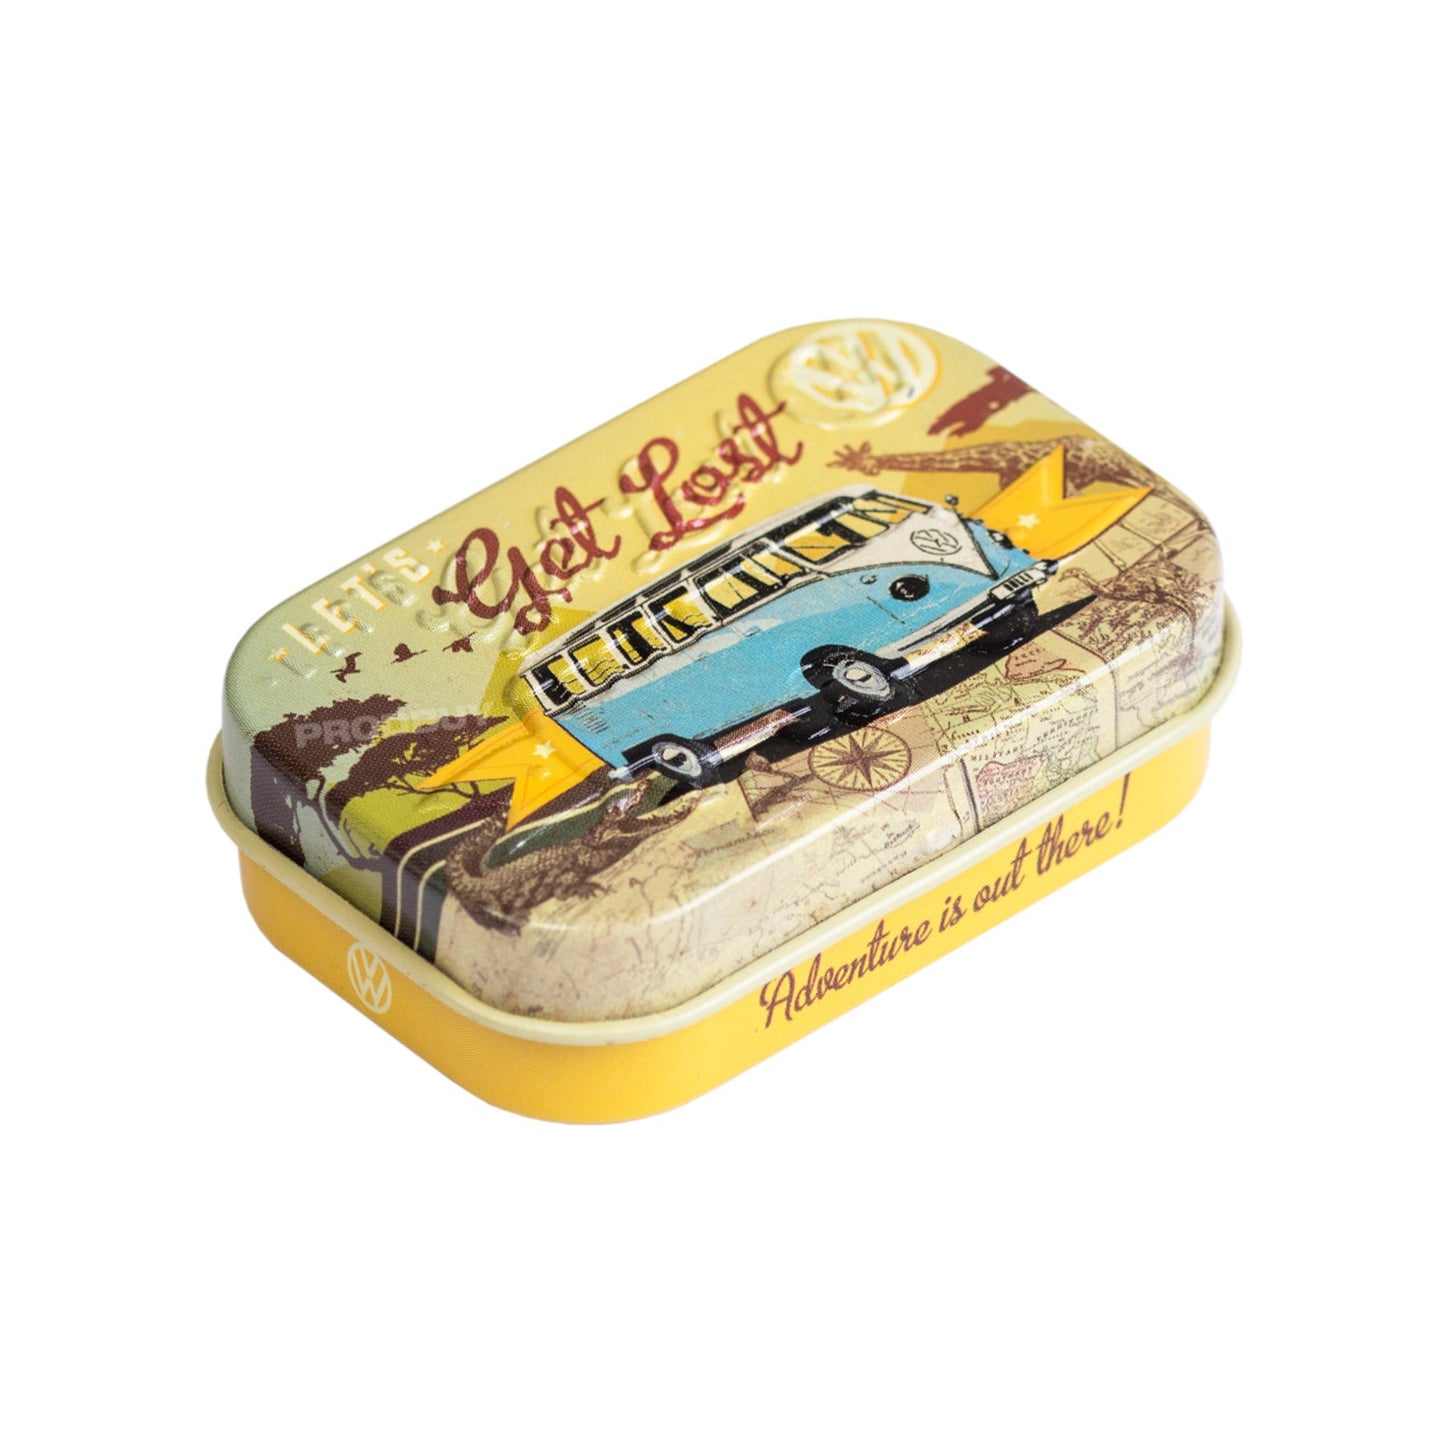 Volkswagen 'Let's Get Lost' Mini 15g Sugar Free Mints In A Tin